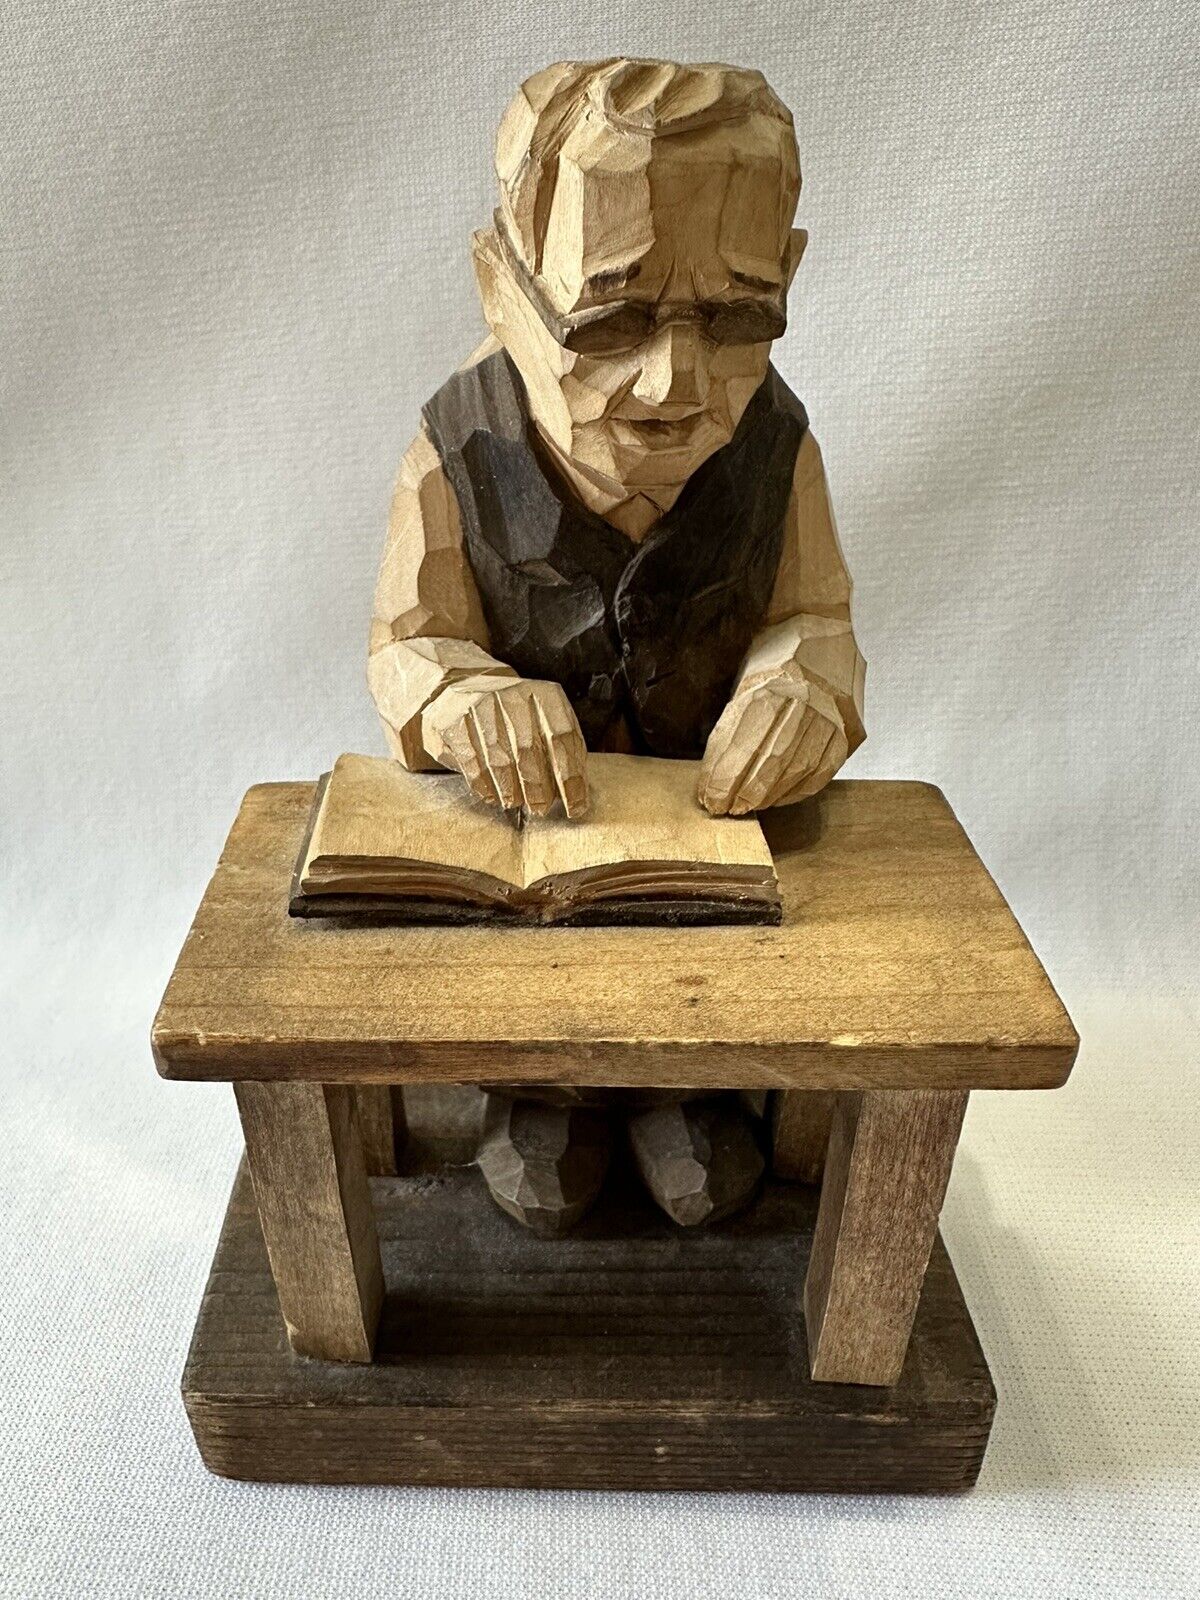 1962 Wood Carving Finland “Sokea” Signed Man Reading Braille Book